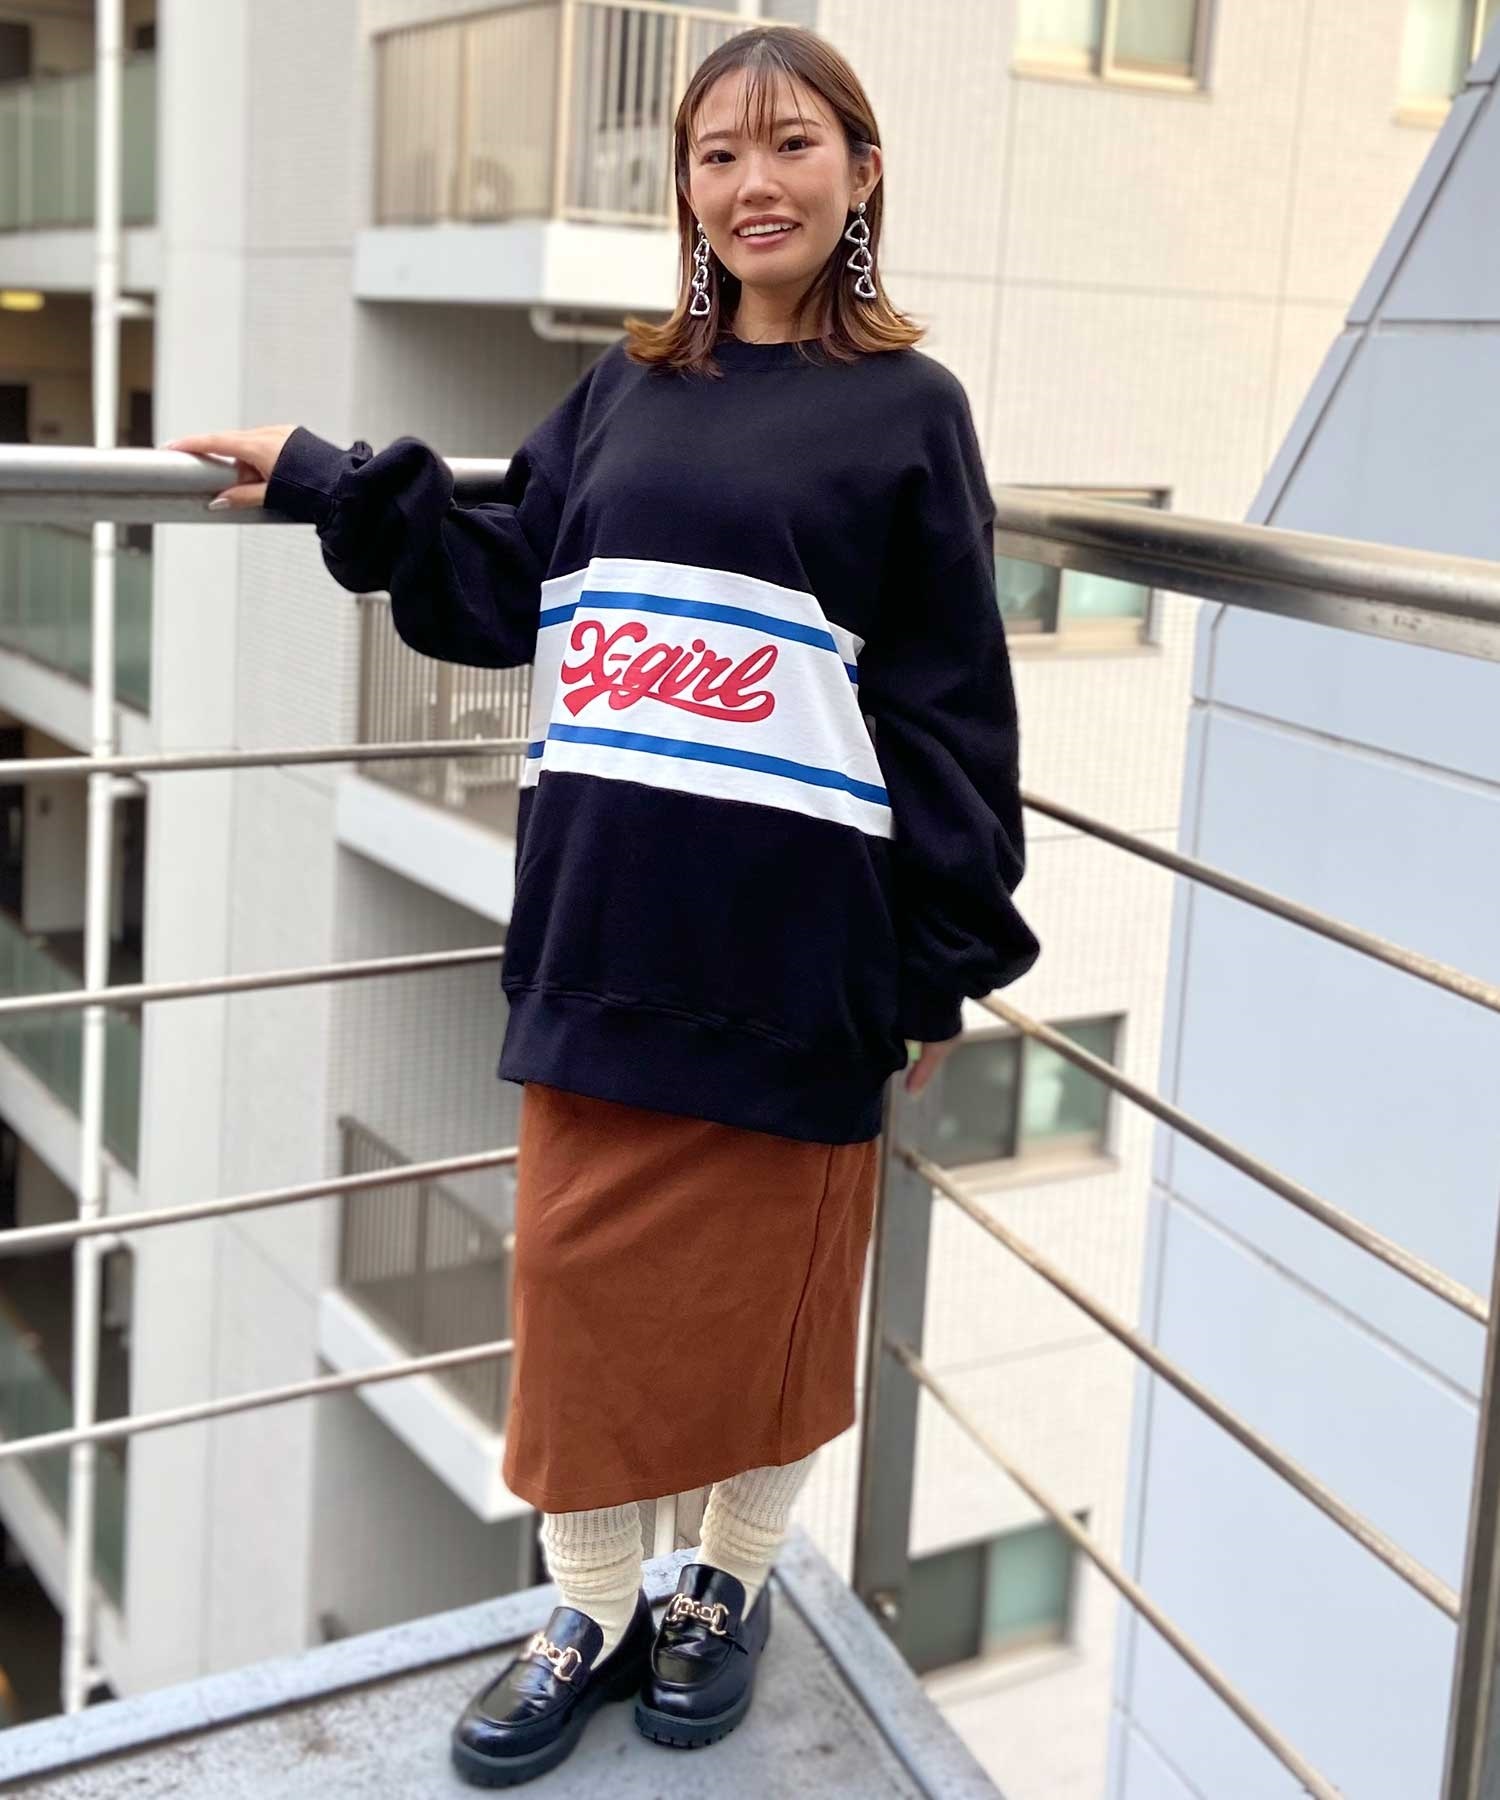 X-GIRL/エックスガール CONTRAST COLOR SWEAT TOP レディース 